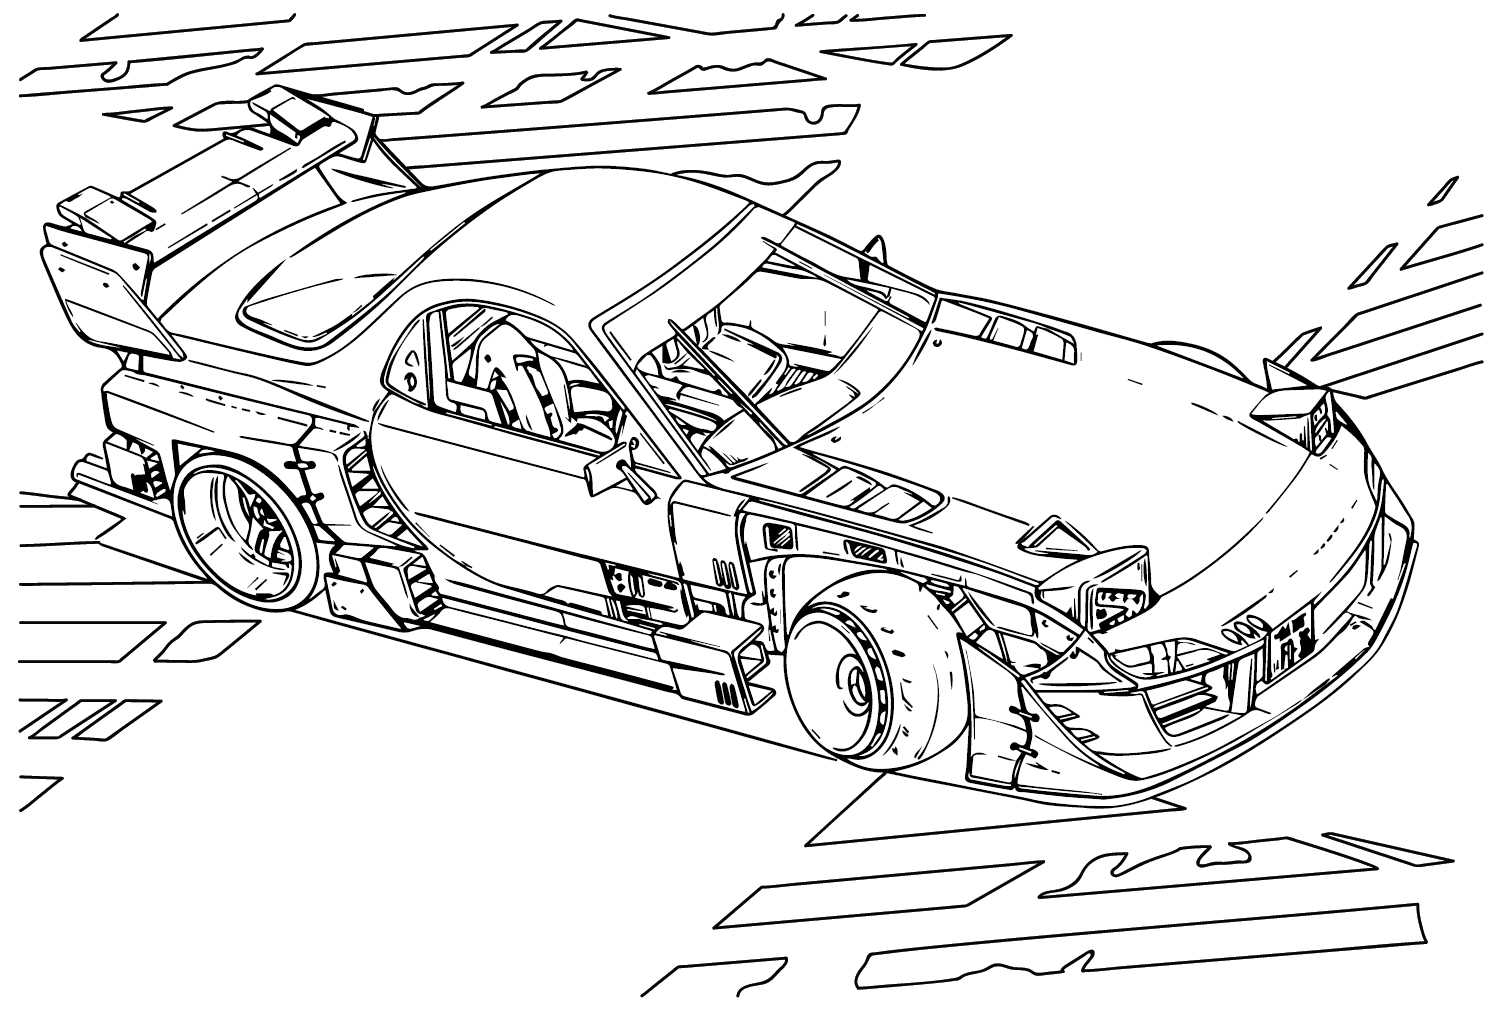 Mazda RX-7 FD3S Coloring Page from Mazda